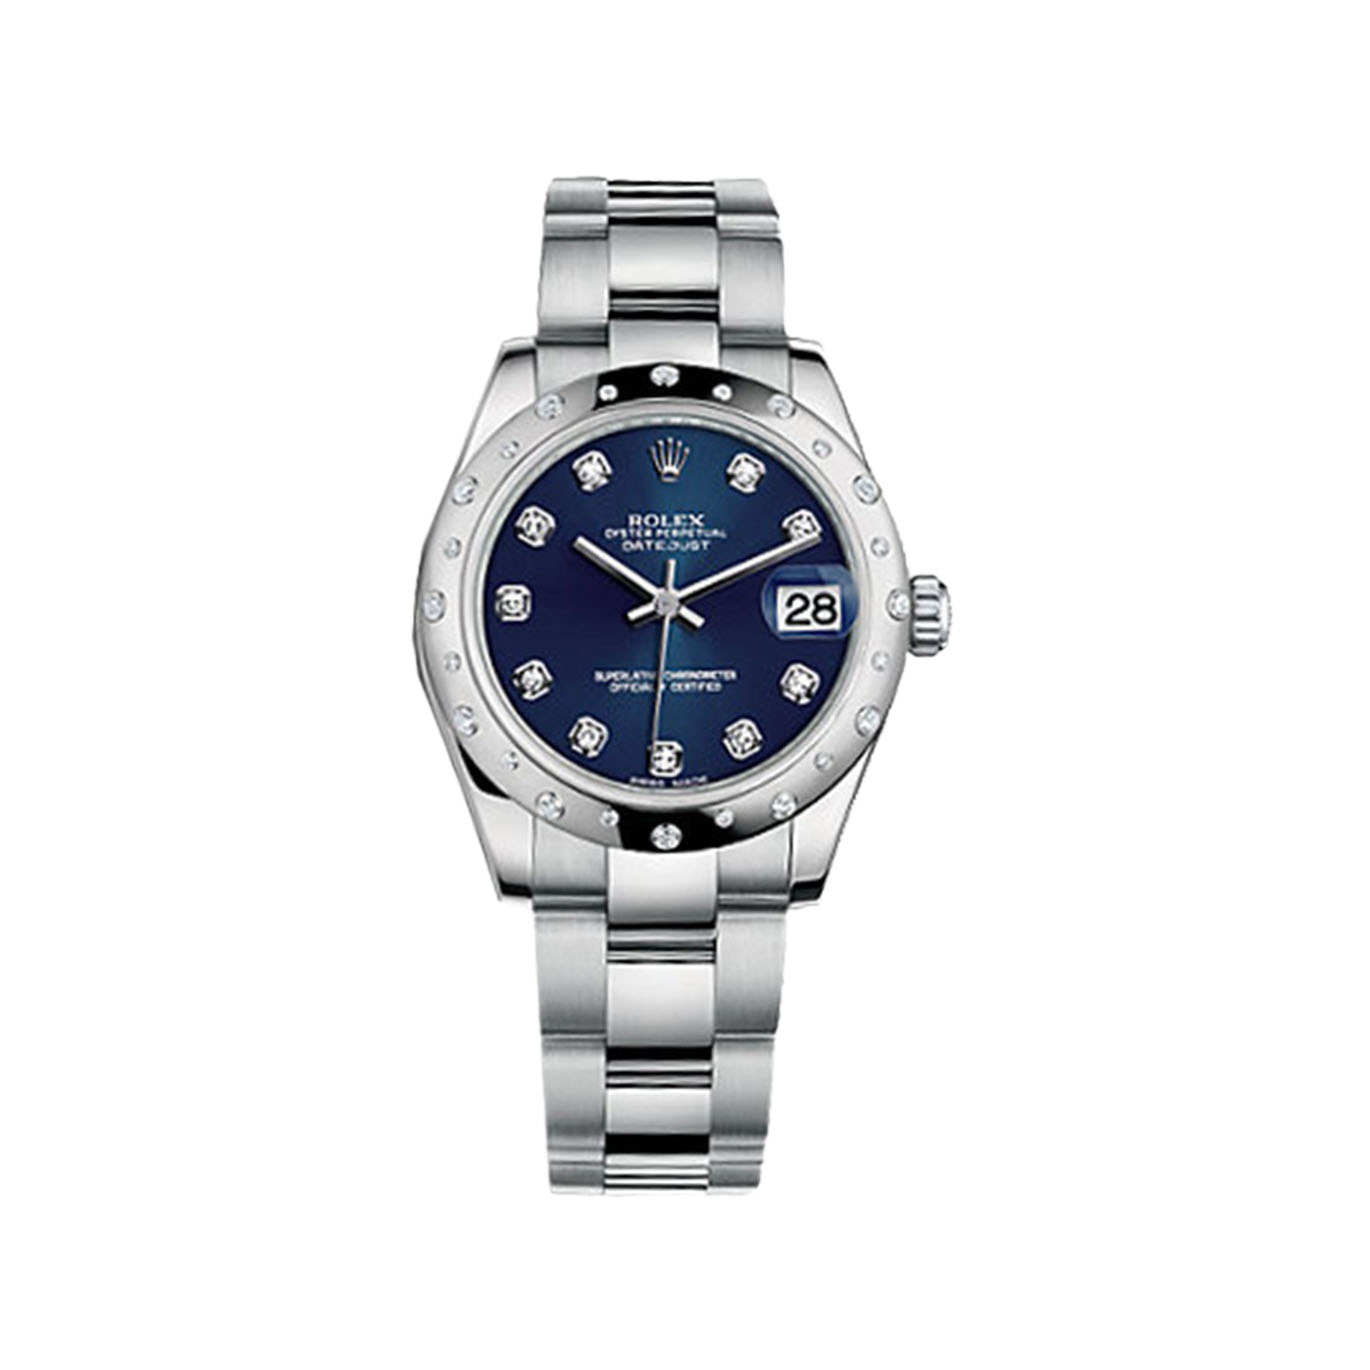 Datejust 31 178344 White Gold & Stainless Steel Watch (Blue Set with Diamonds)